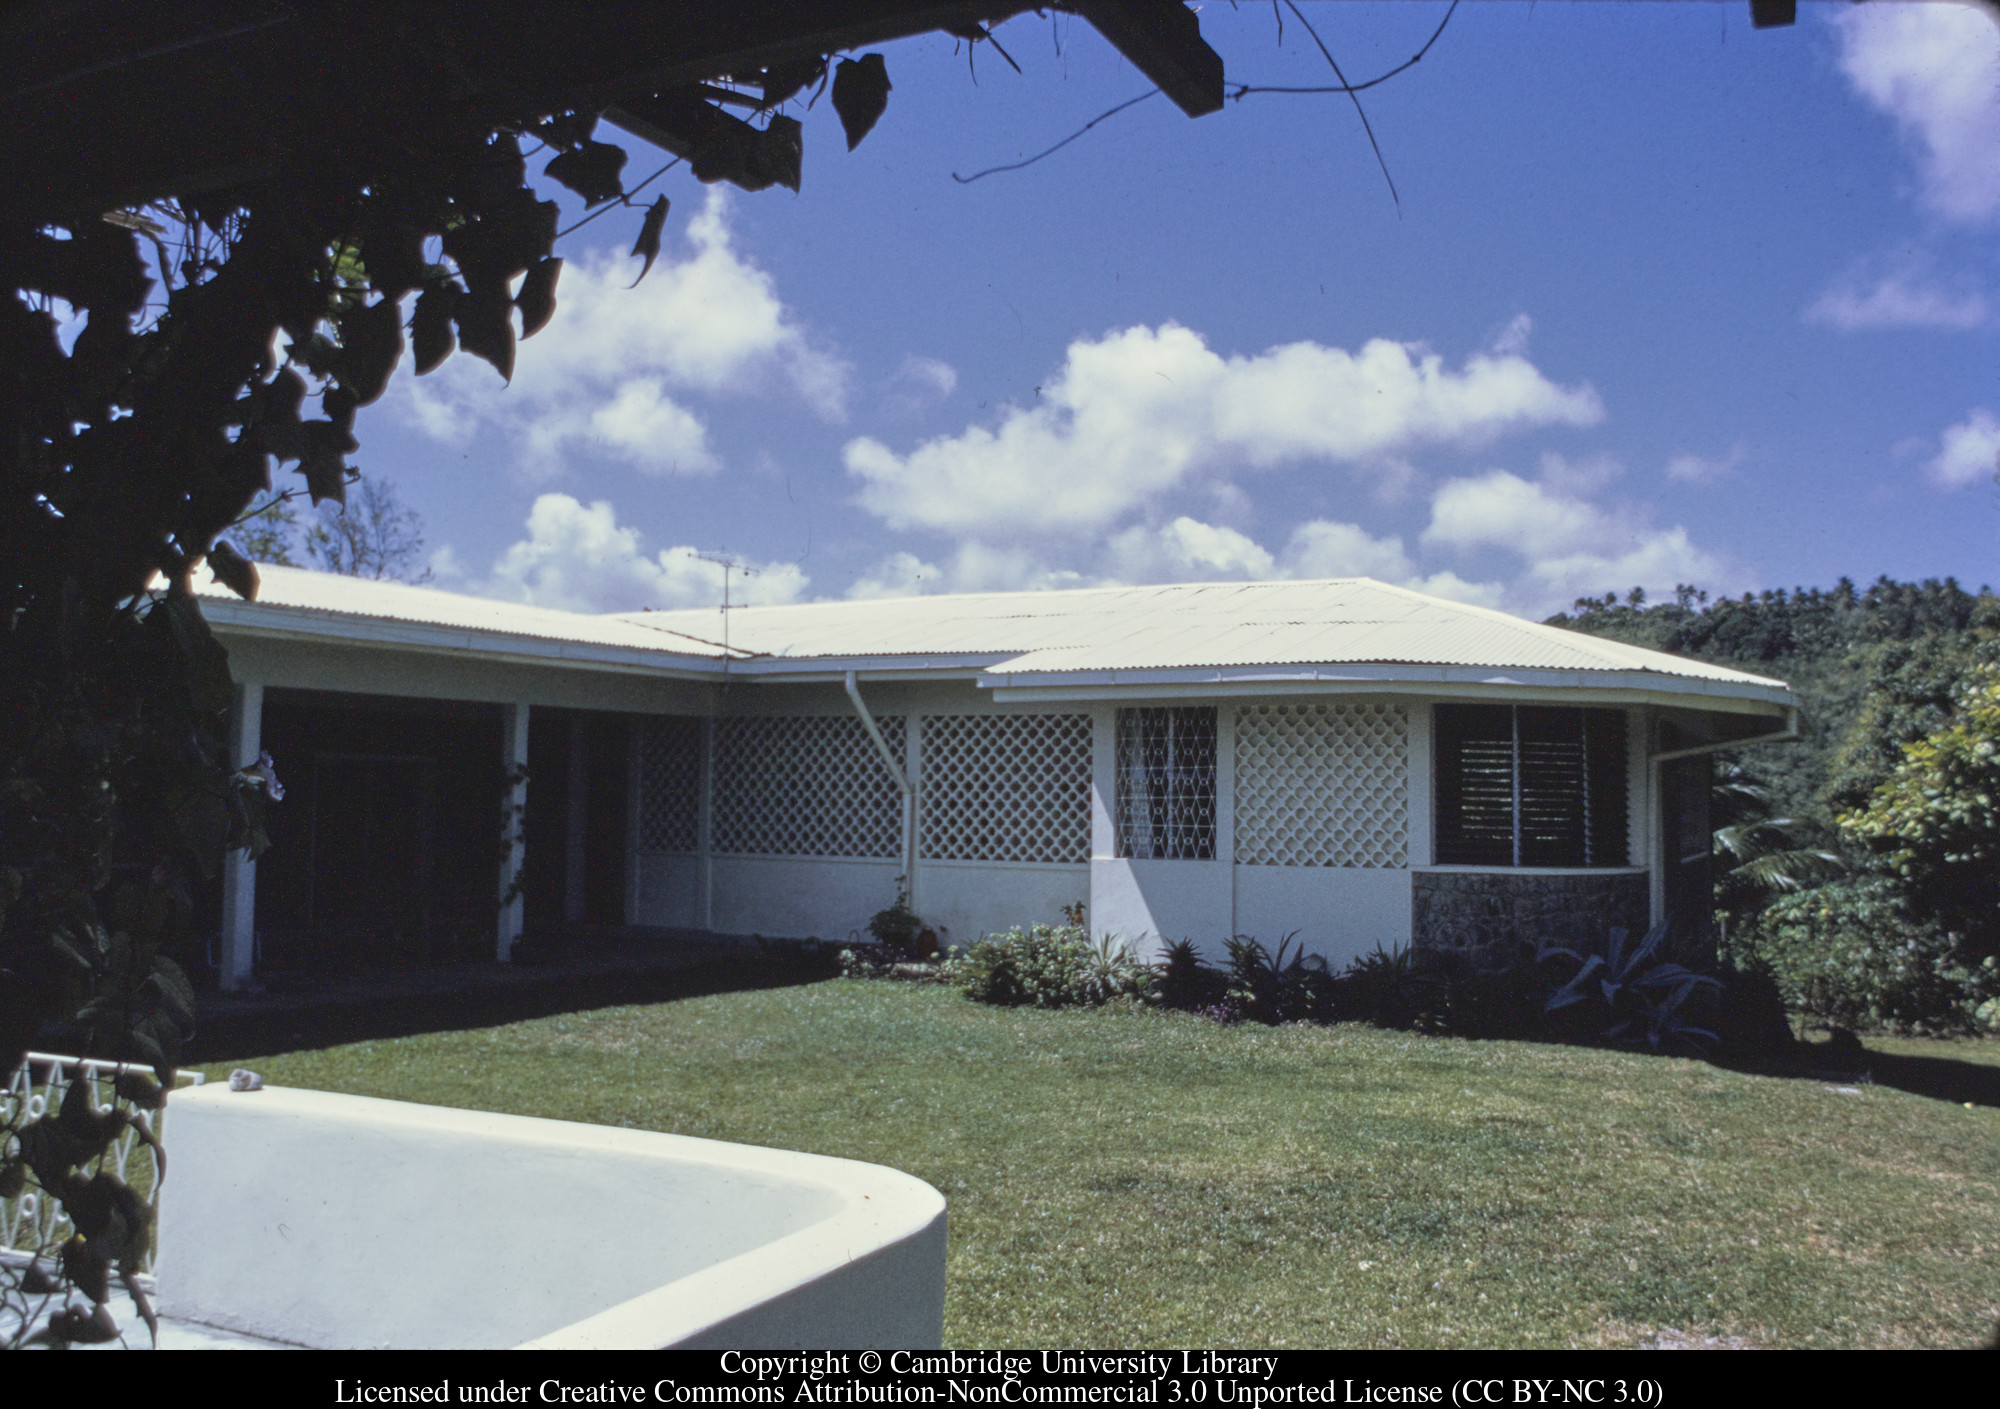 C [Ciceron] : house from lawn, 1971-06